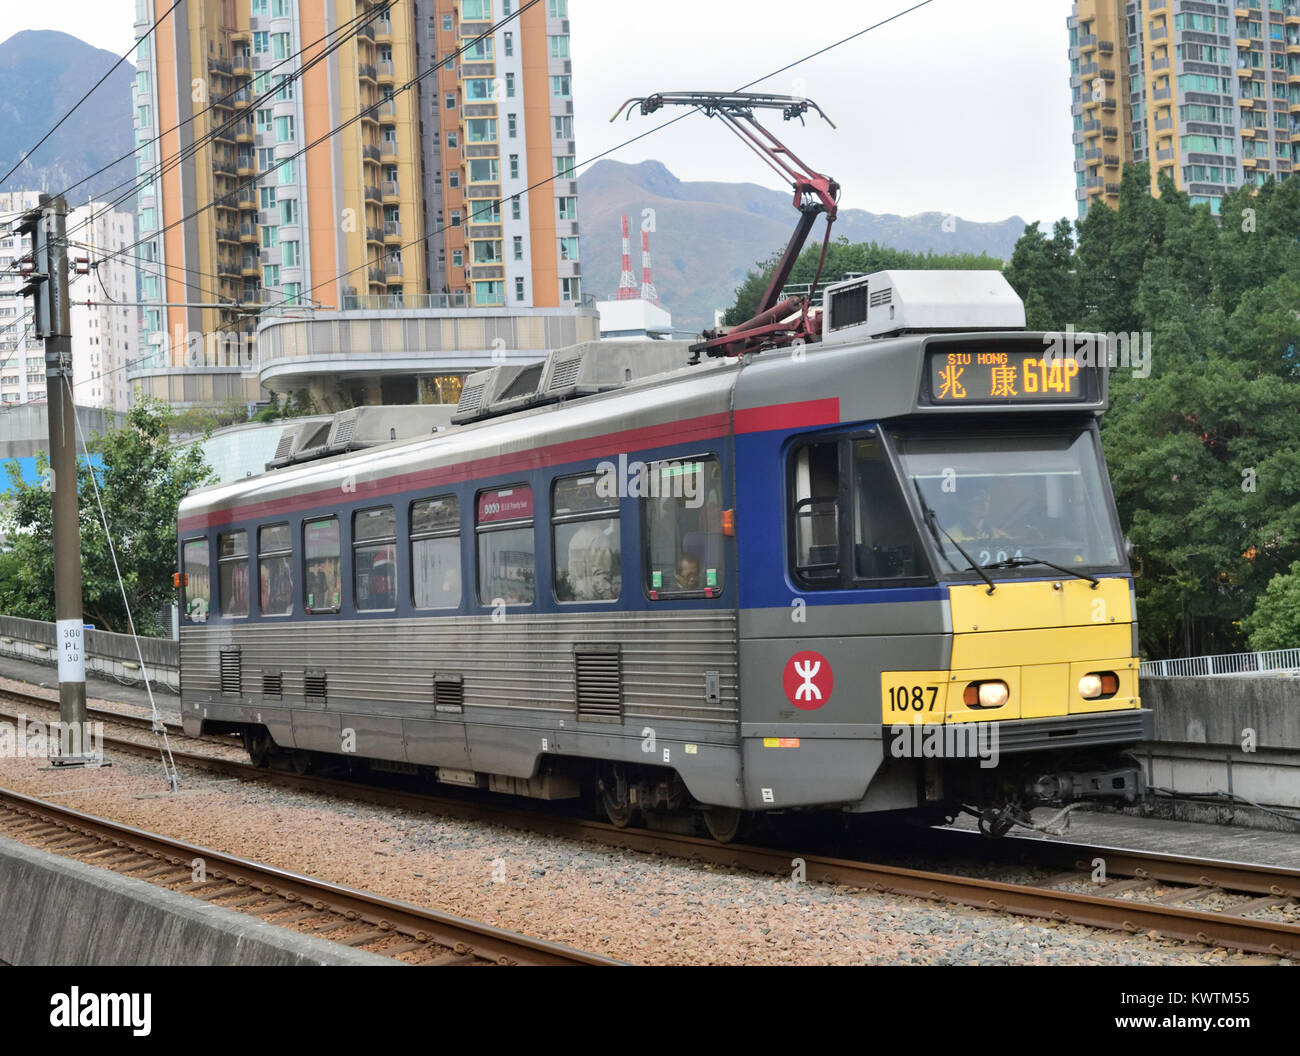 A tram on an overhead rail section of the Light Rail System which operates between Yuen Long and Tuen Mun, Hong Kong Stock Photo